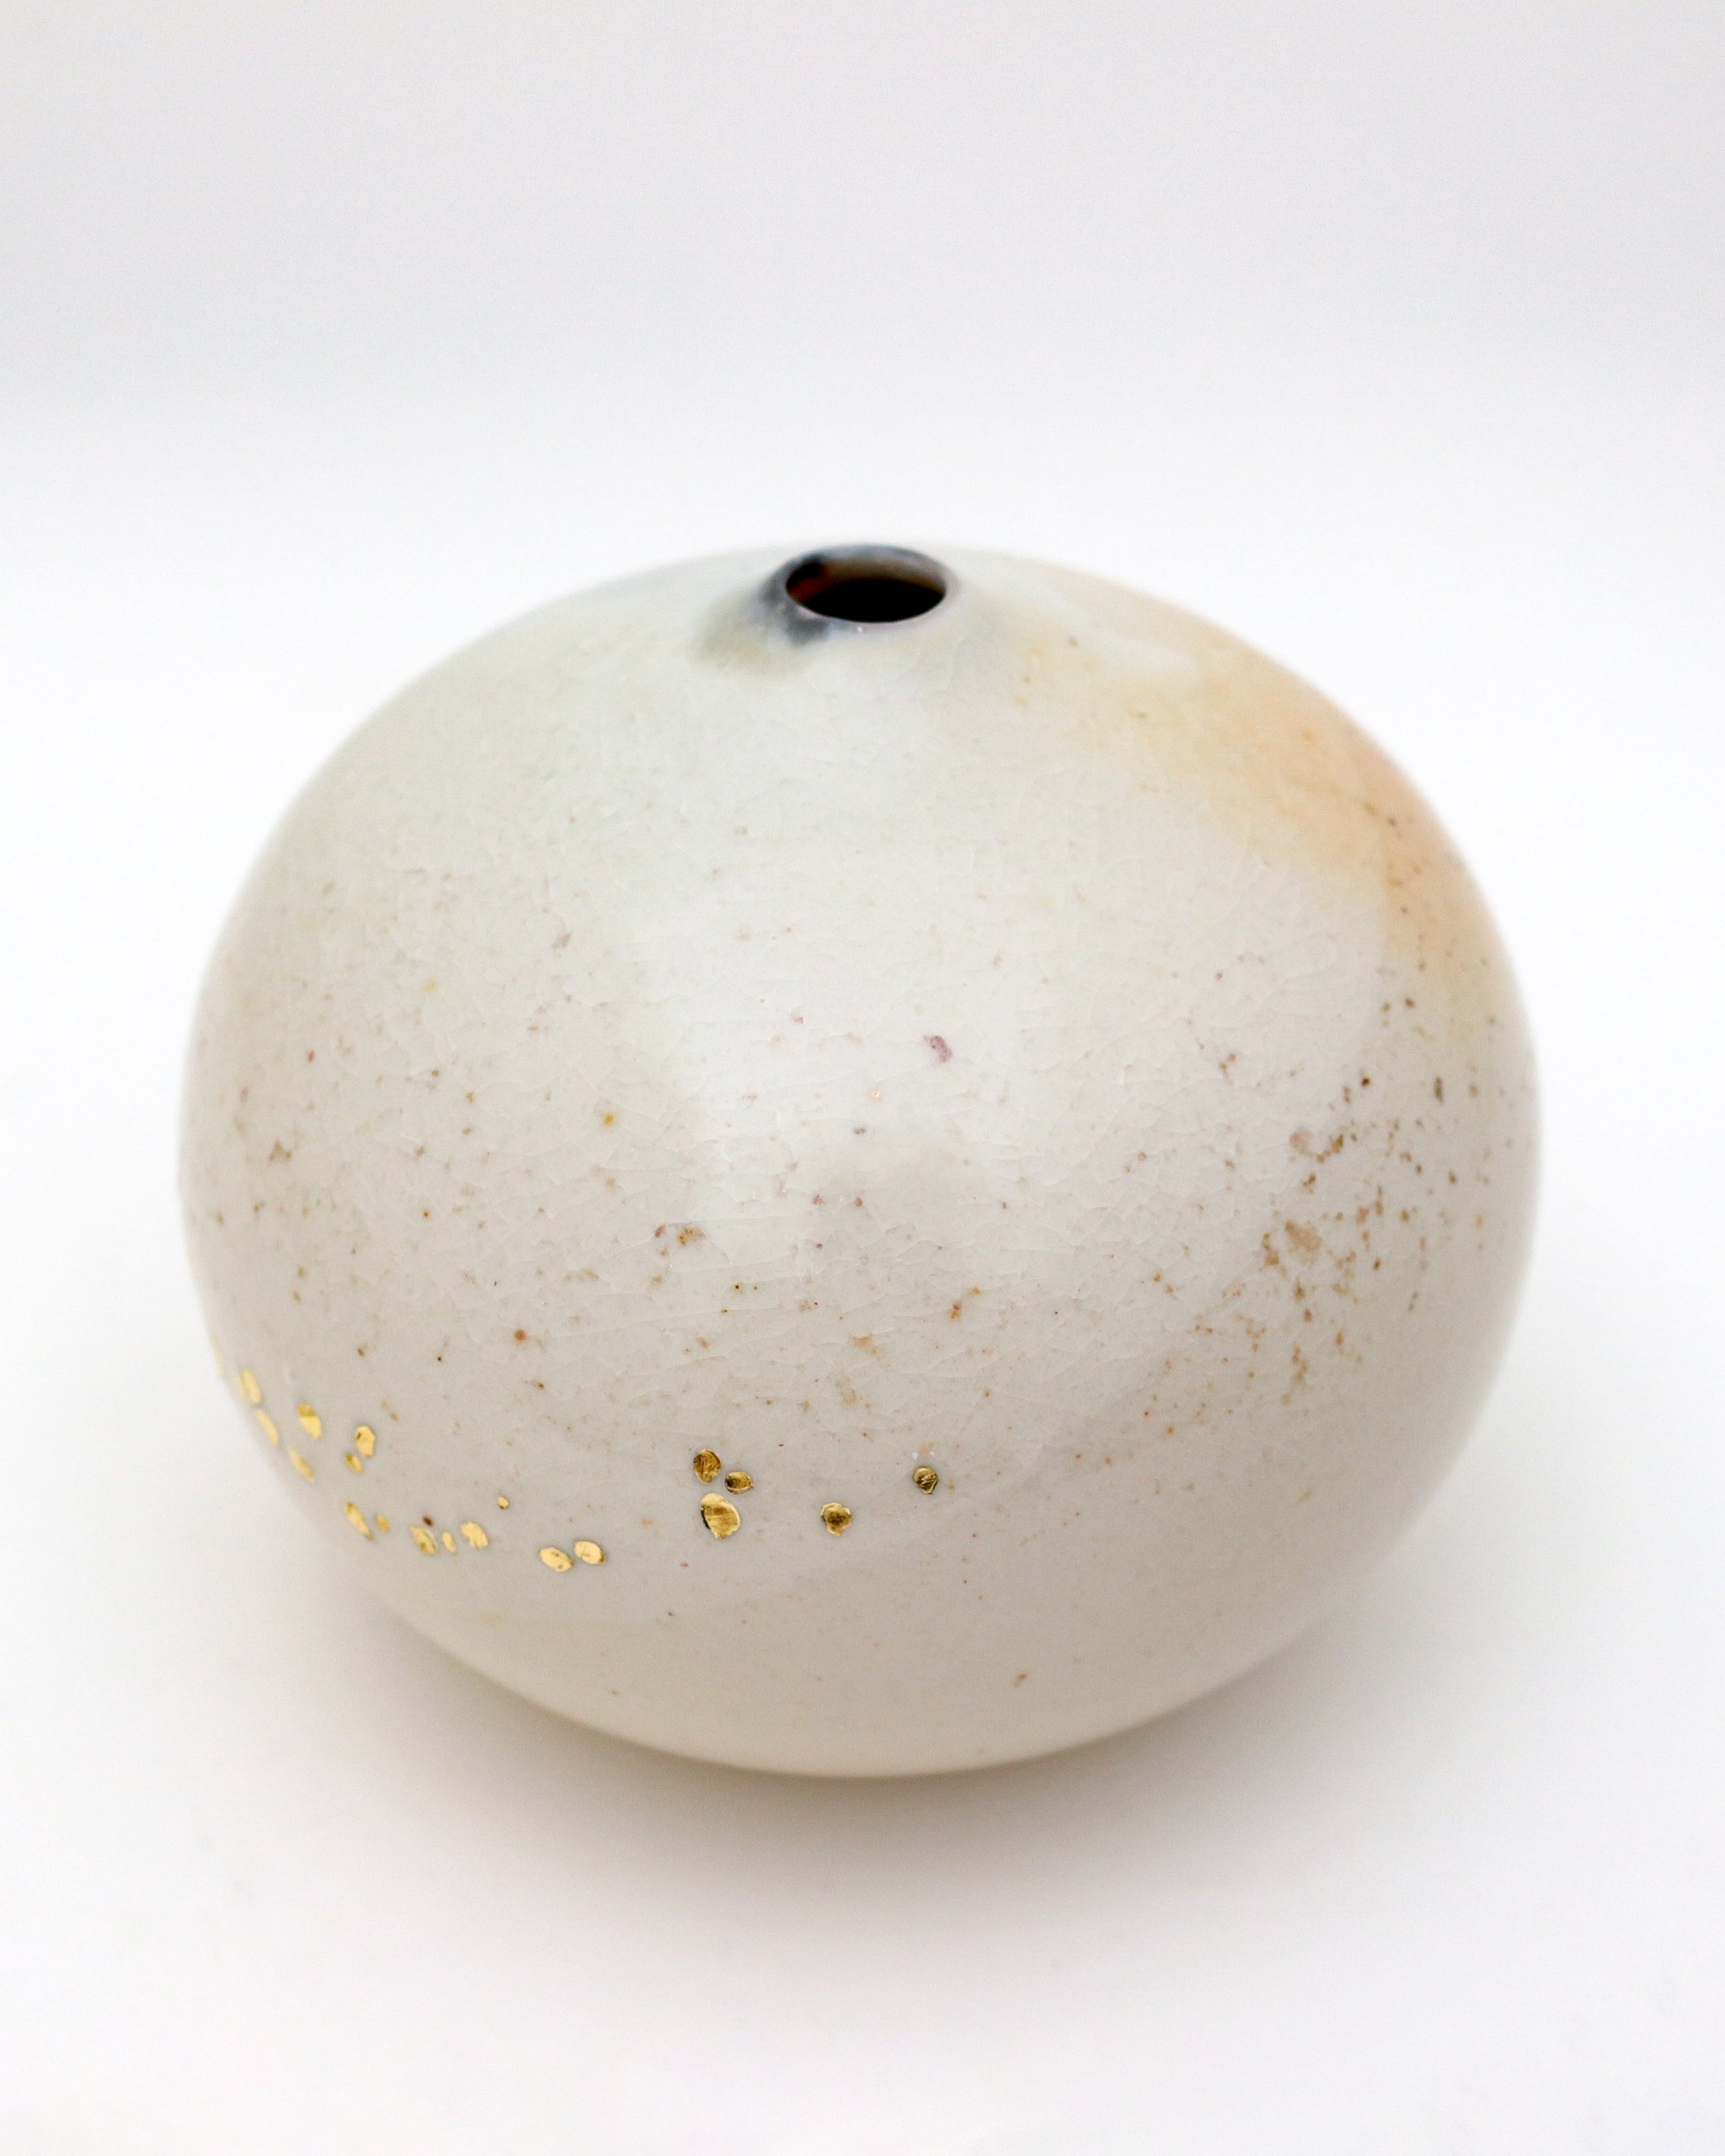 Wood-fired spherical vase with golden pinholes